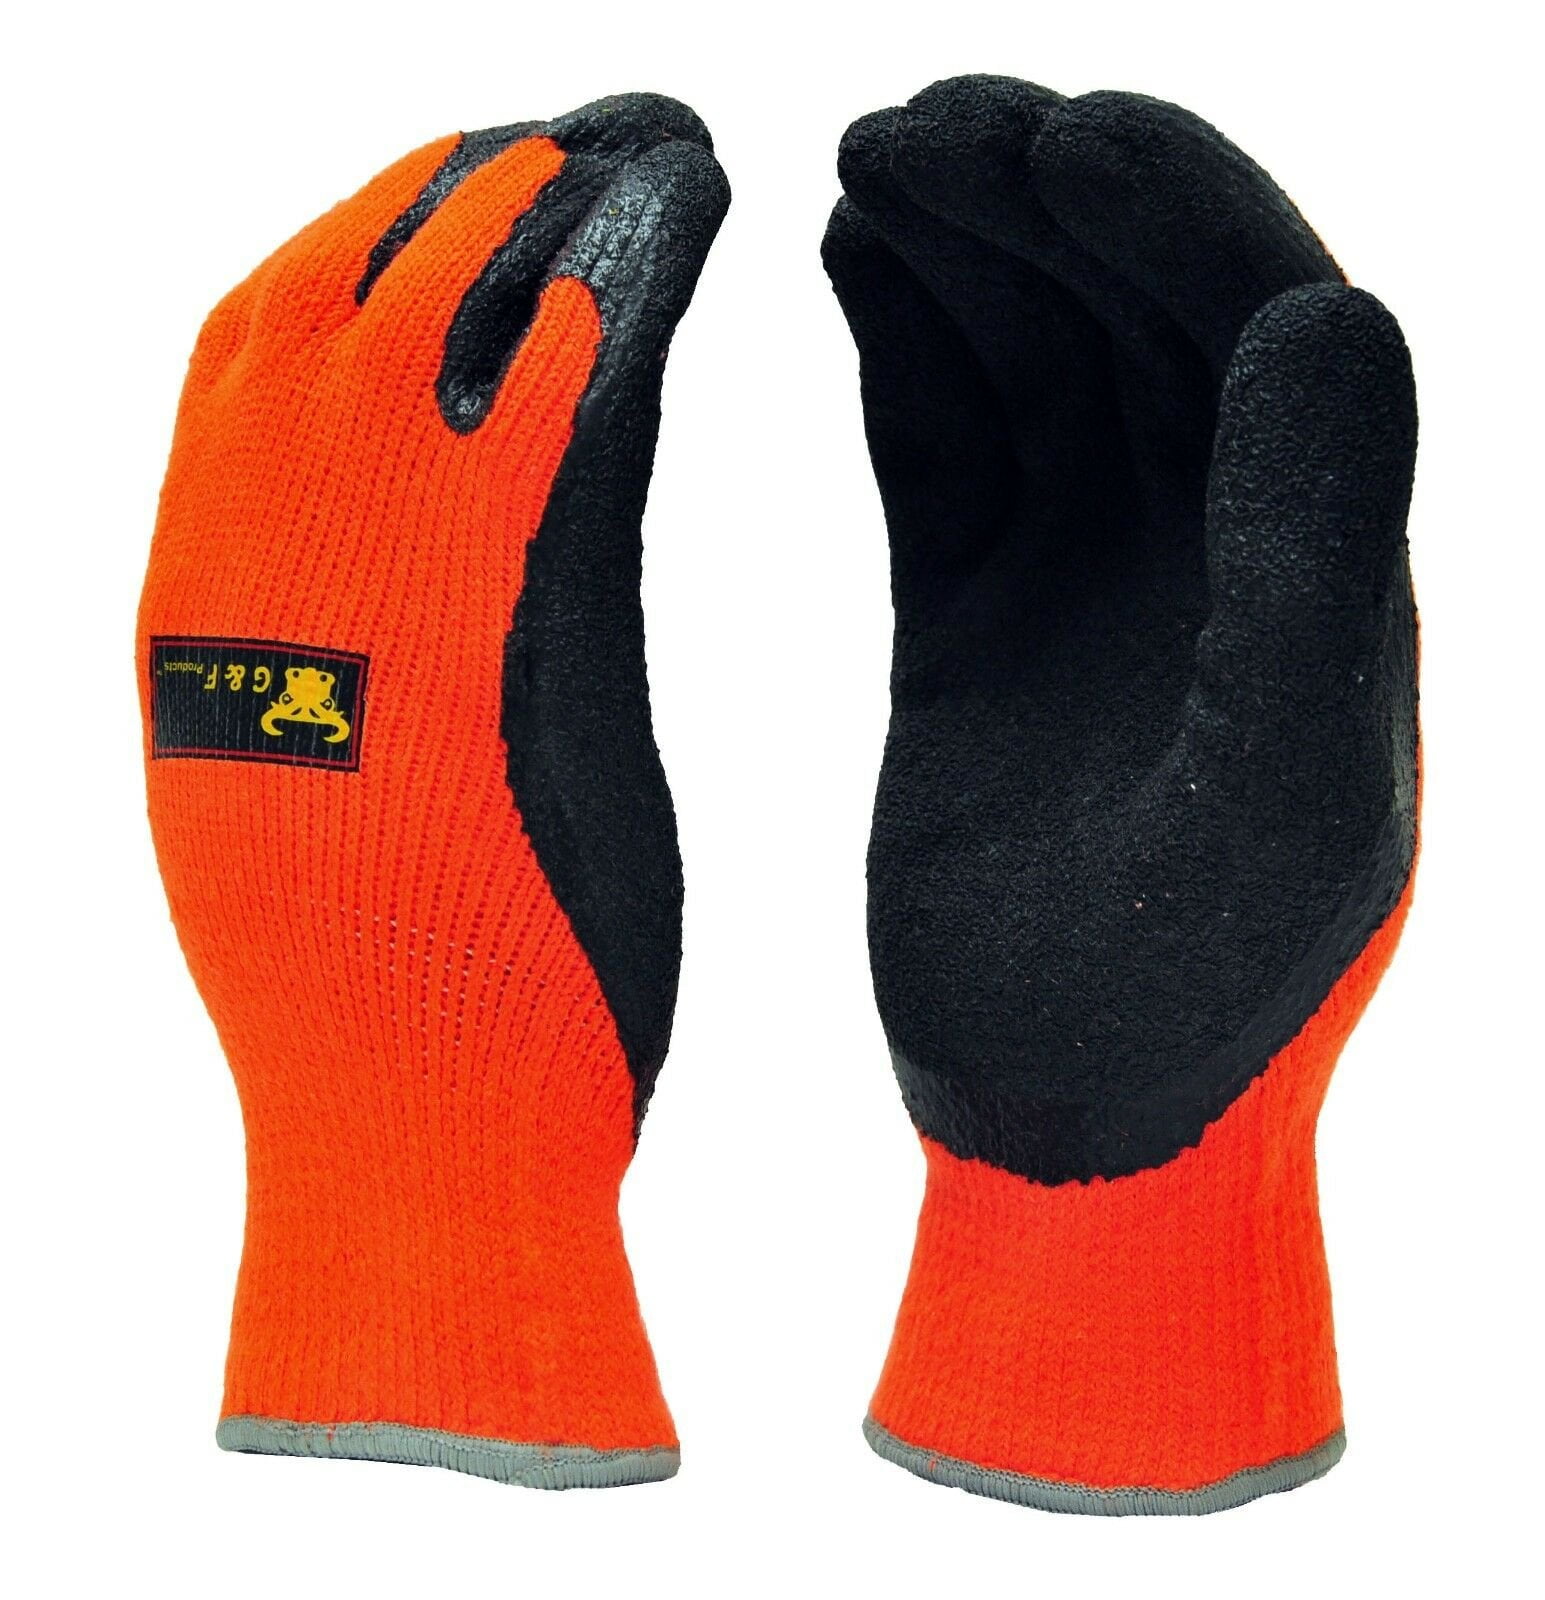 G & F GripMaster Latex Coated Winter Outdoor Work Gloves Large 